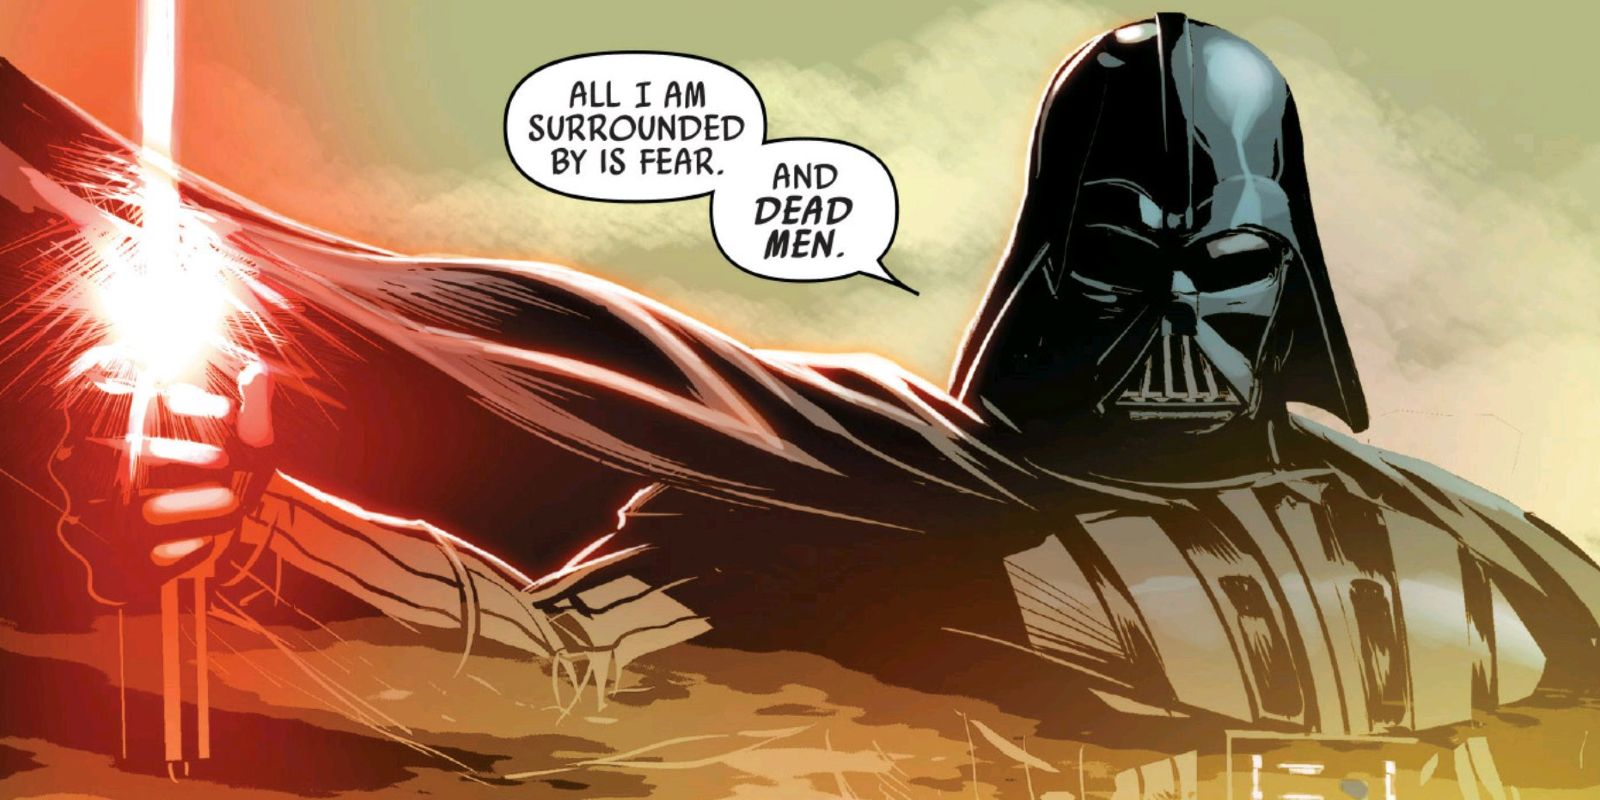 Darth Vader slaughters a group of rebels in his Star Wars comic